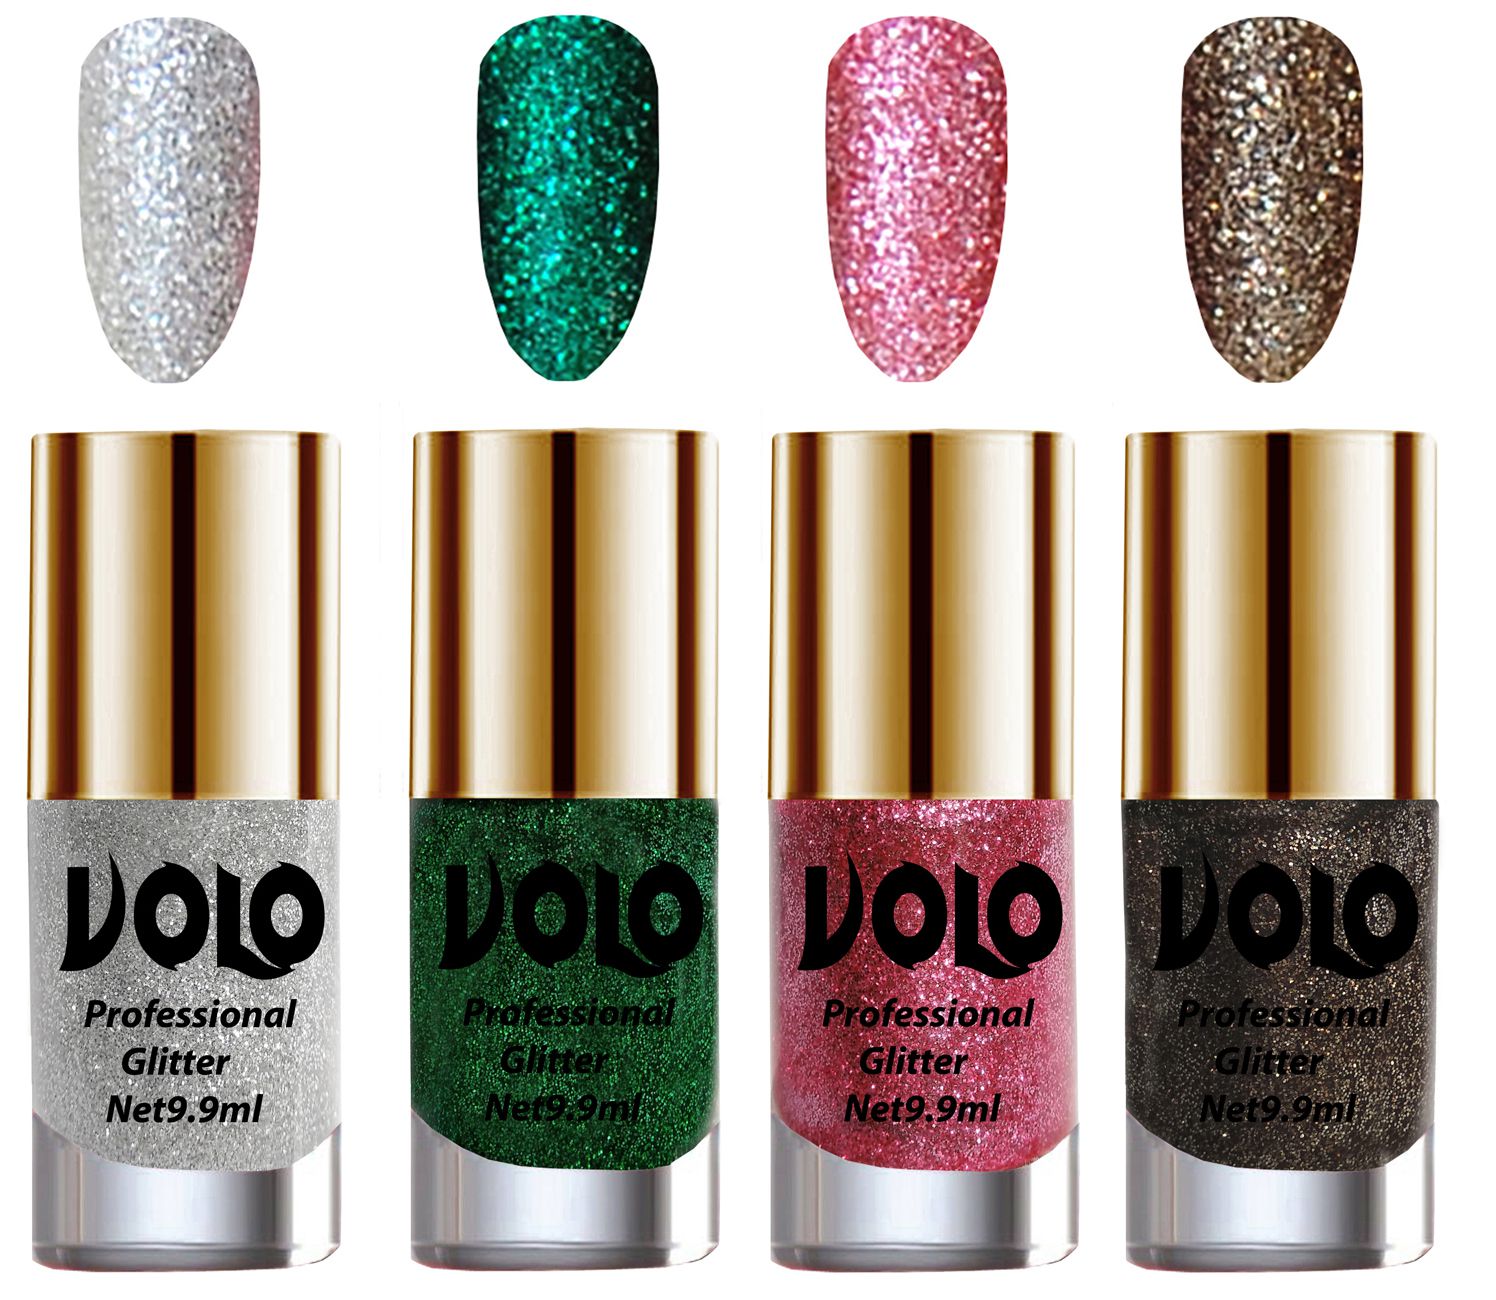     			VOLO Professionally Used Glitter Shine Nail Polish Silver,Green,Pink Grey Pack of 4 39 mL